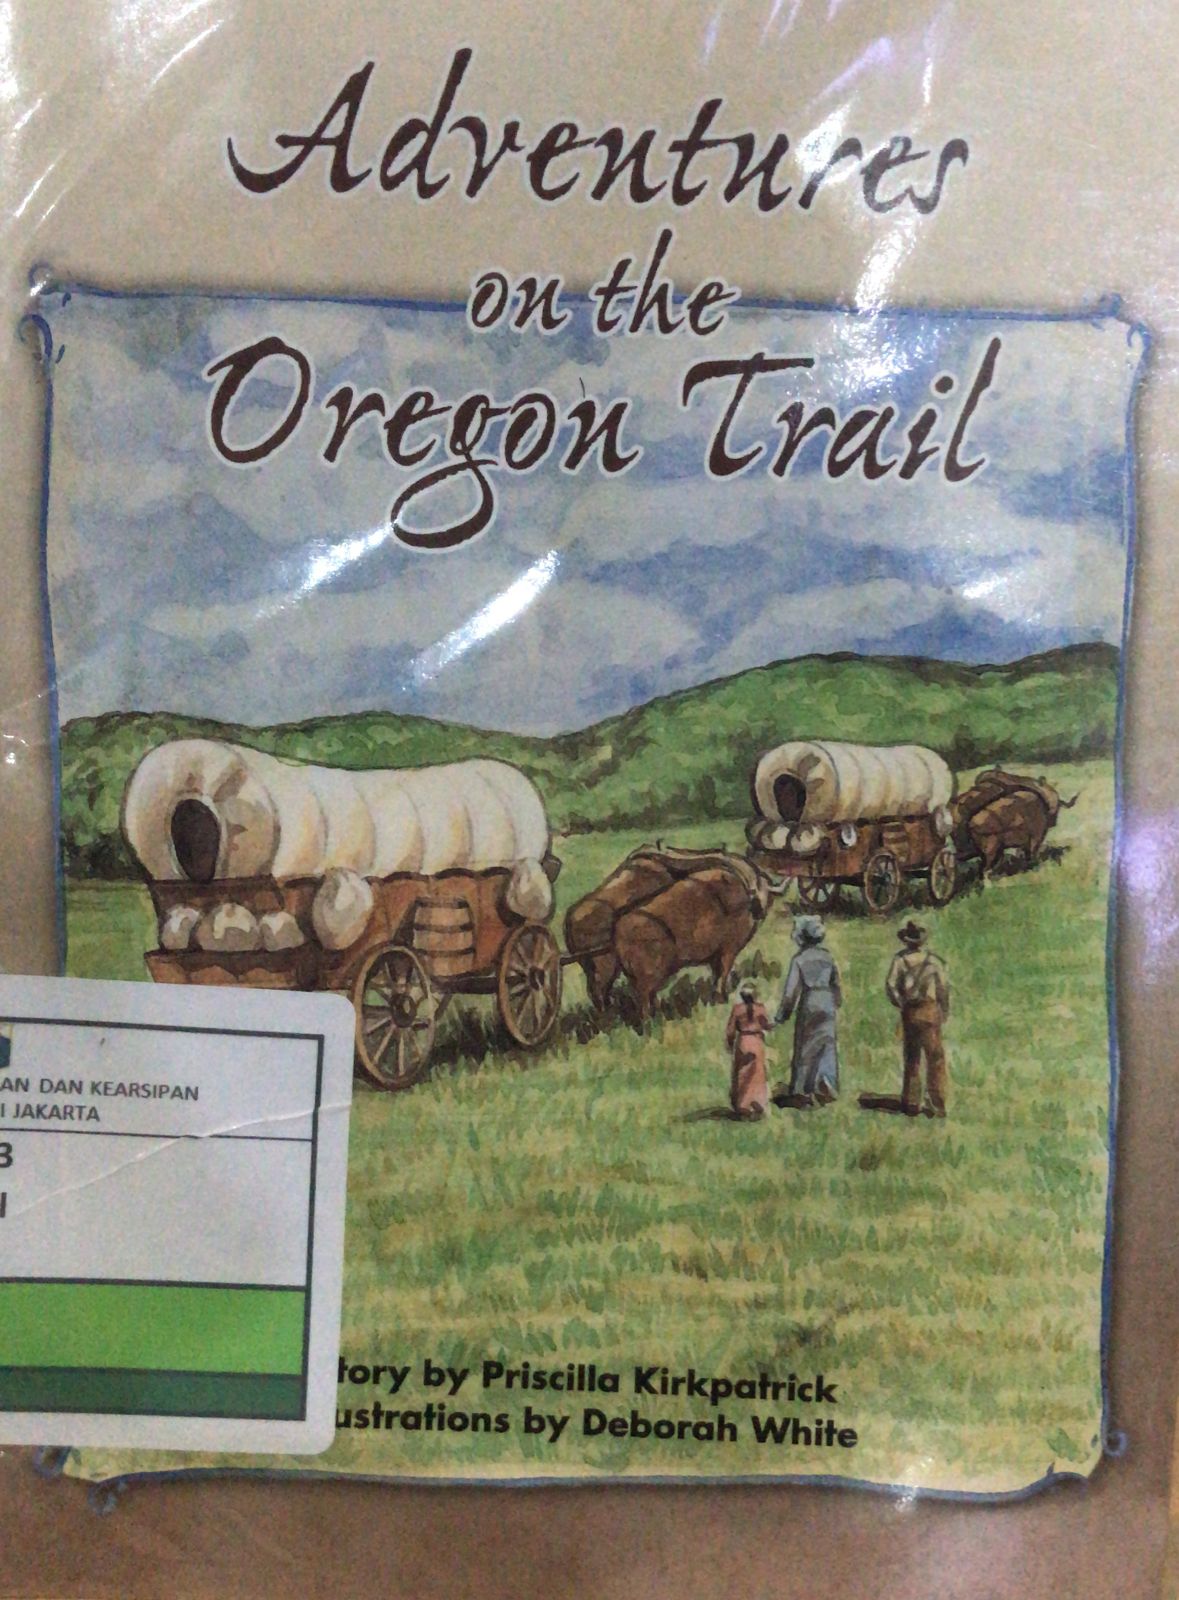 Adventures on the Oregon Trail